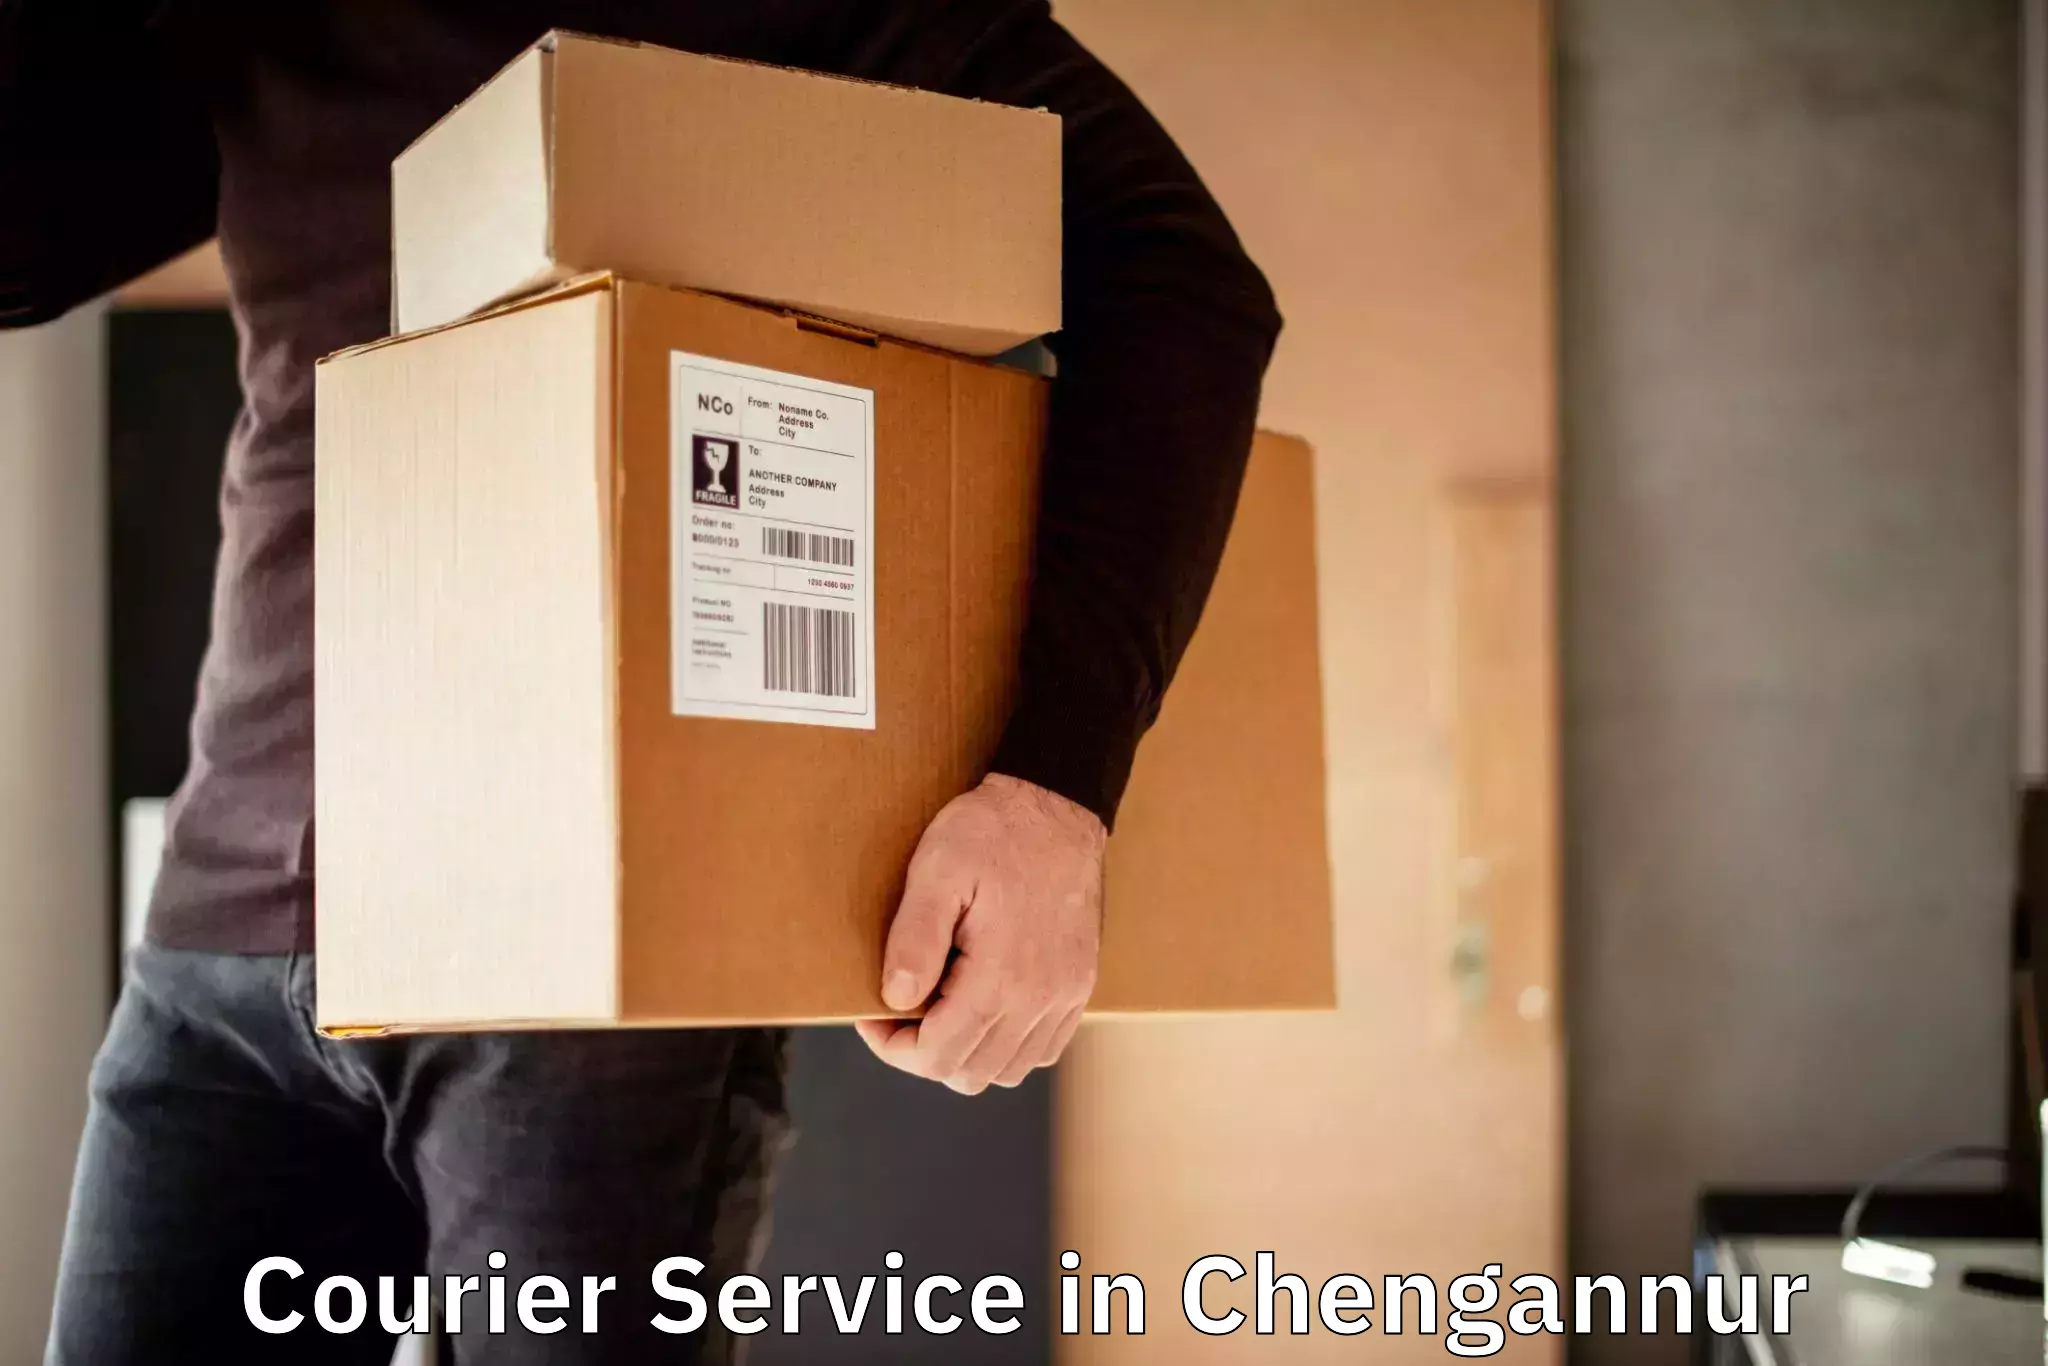 On-call courier service in Chengannur